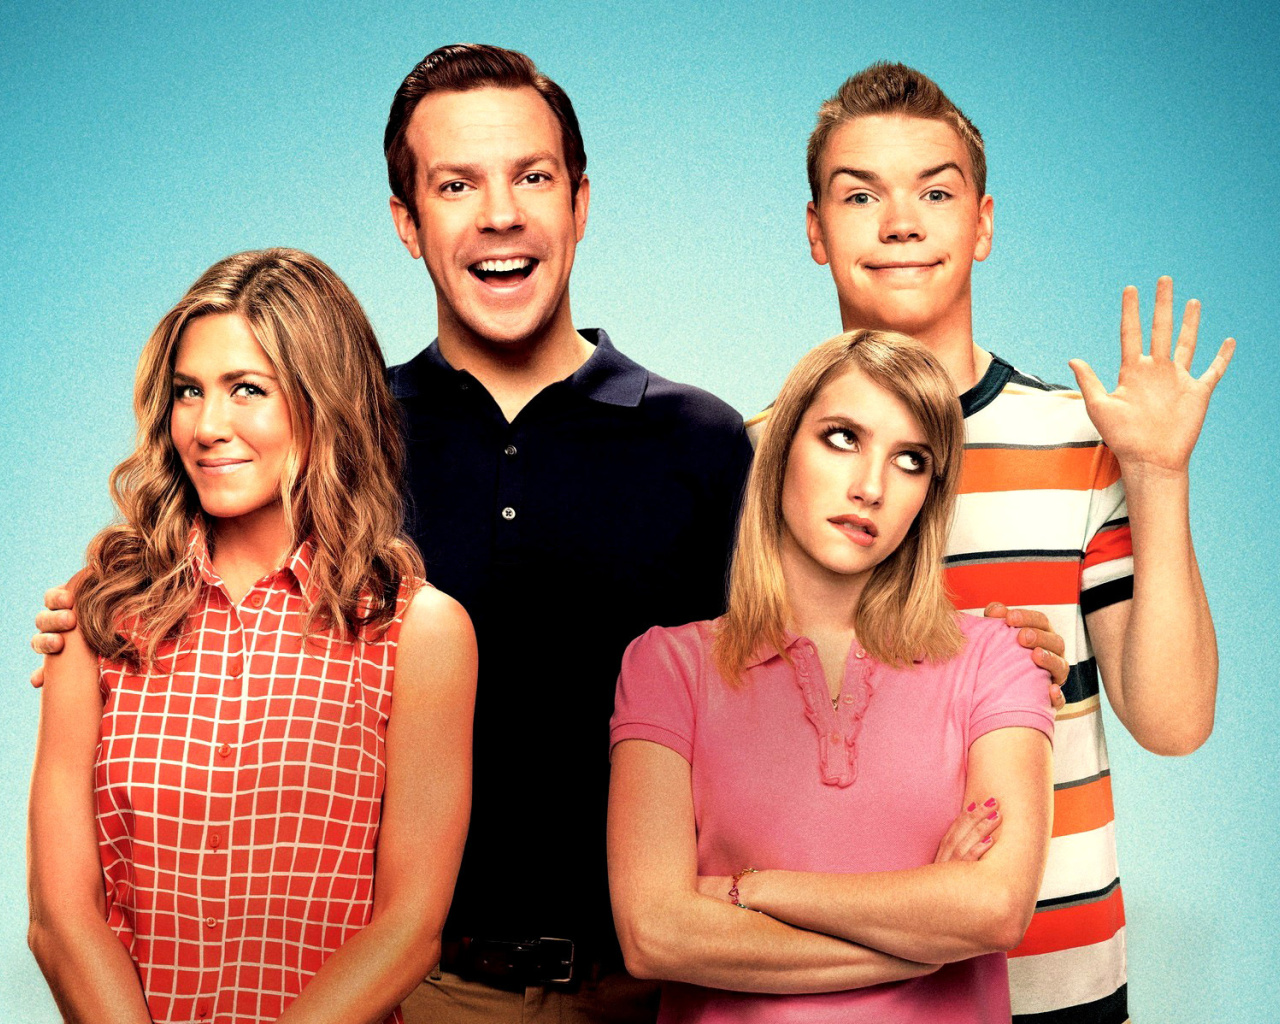 We are the Millers wallpaper 1280x1024